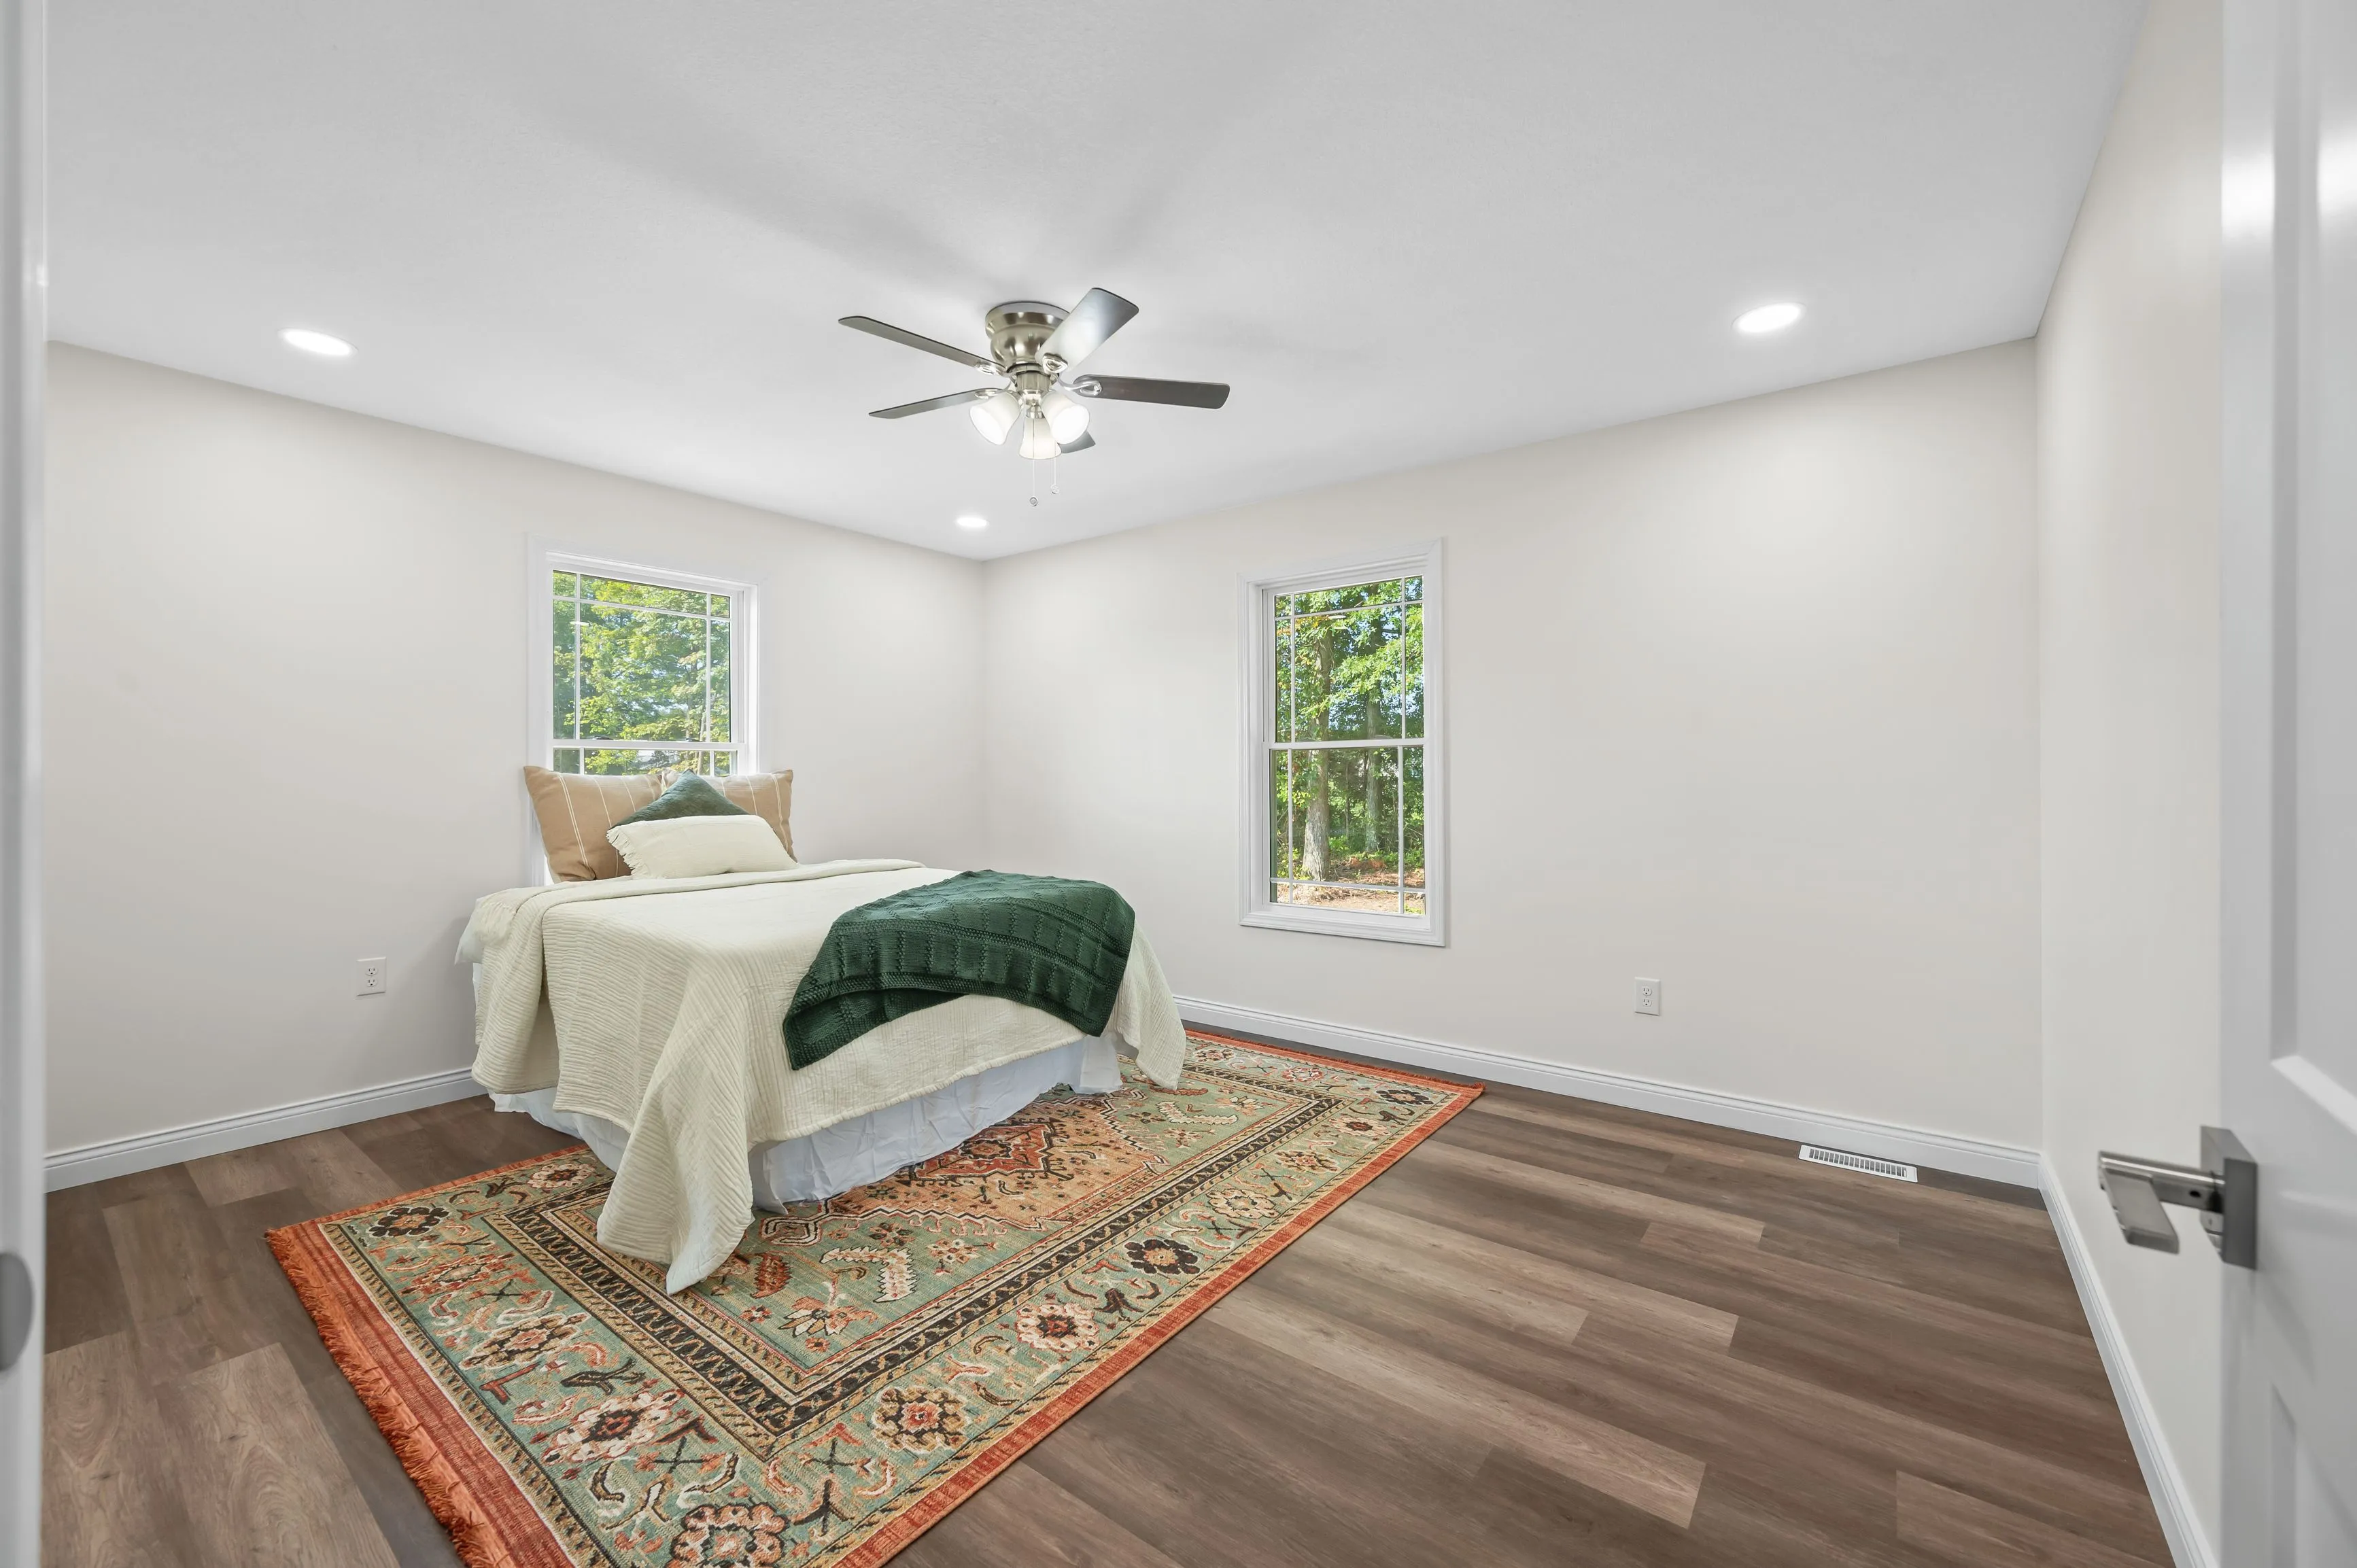 Bright minimalist bedroom with a bed, ceiling fan, recessed lighting, two windows, and a traditional area rug on a hardwood floor.